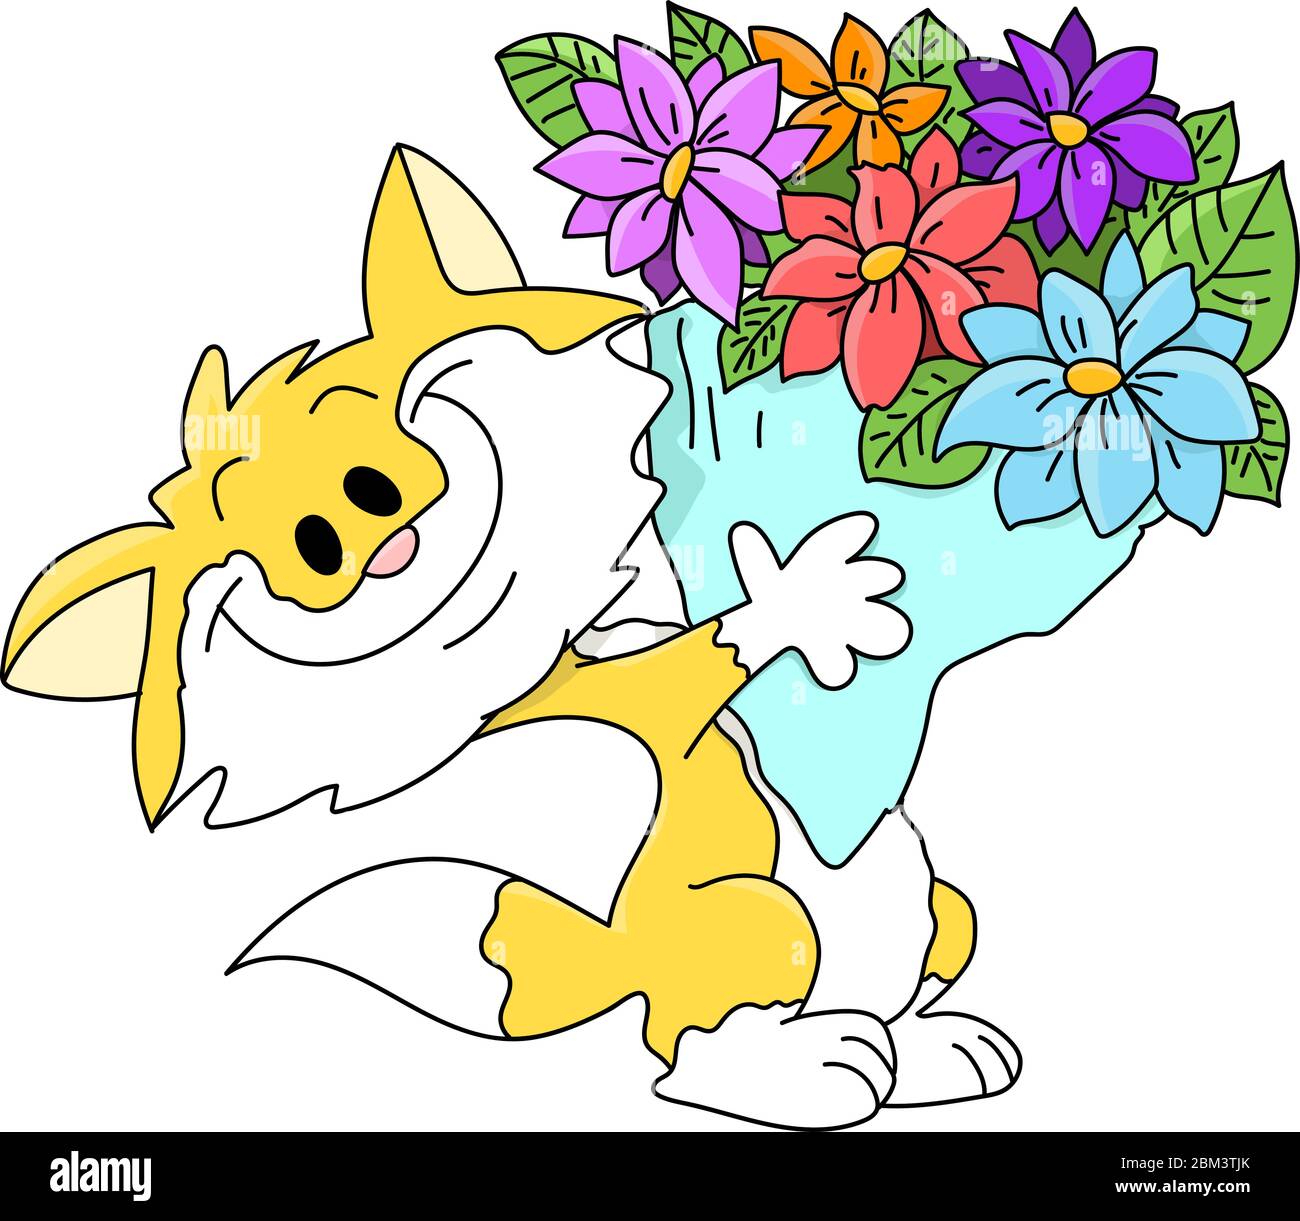 Cartoon cat holding a bouquet of flowers vector illustration Stock Vector